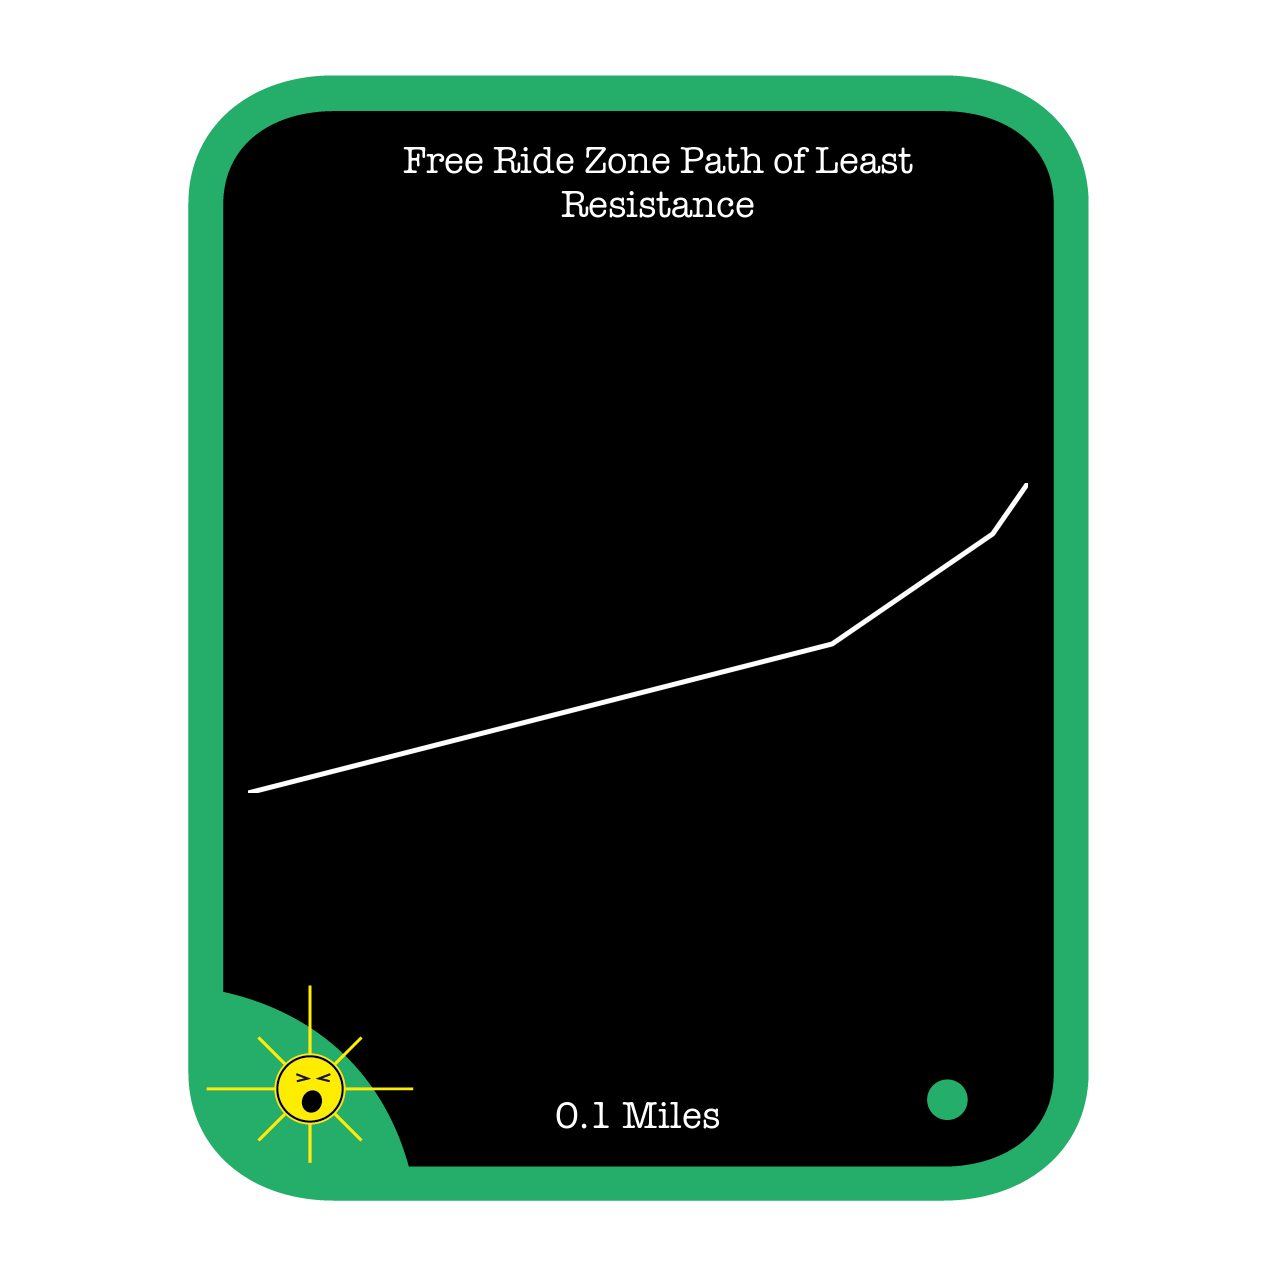 Free Ride Zone Path of Least Resistance